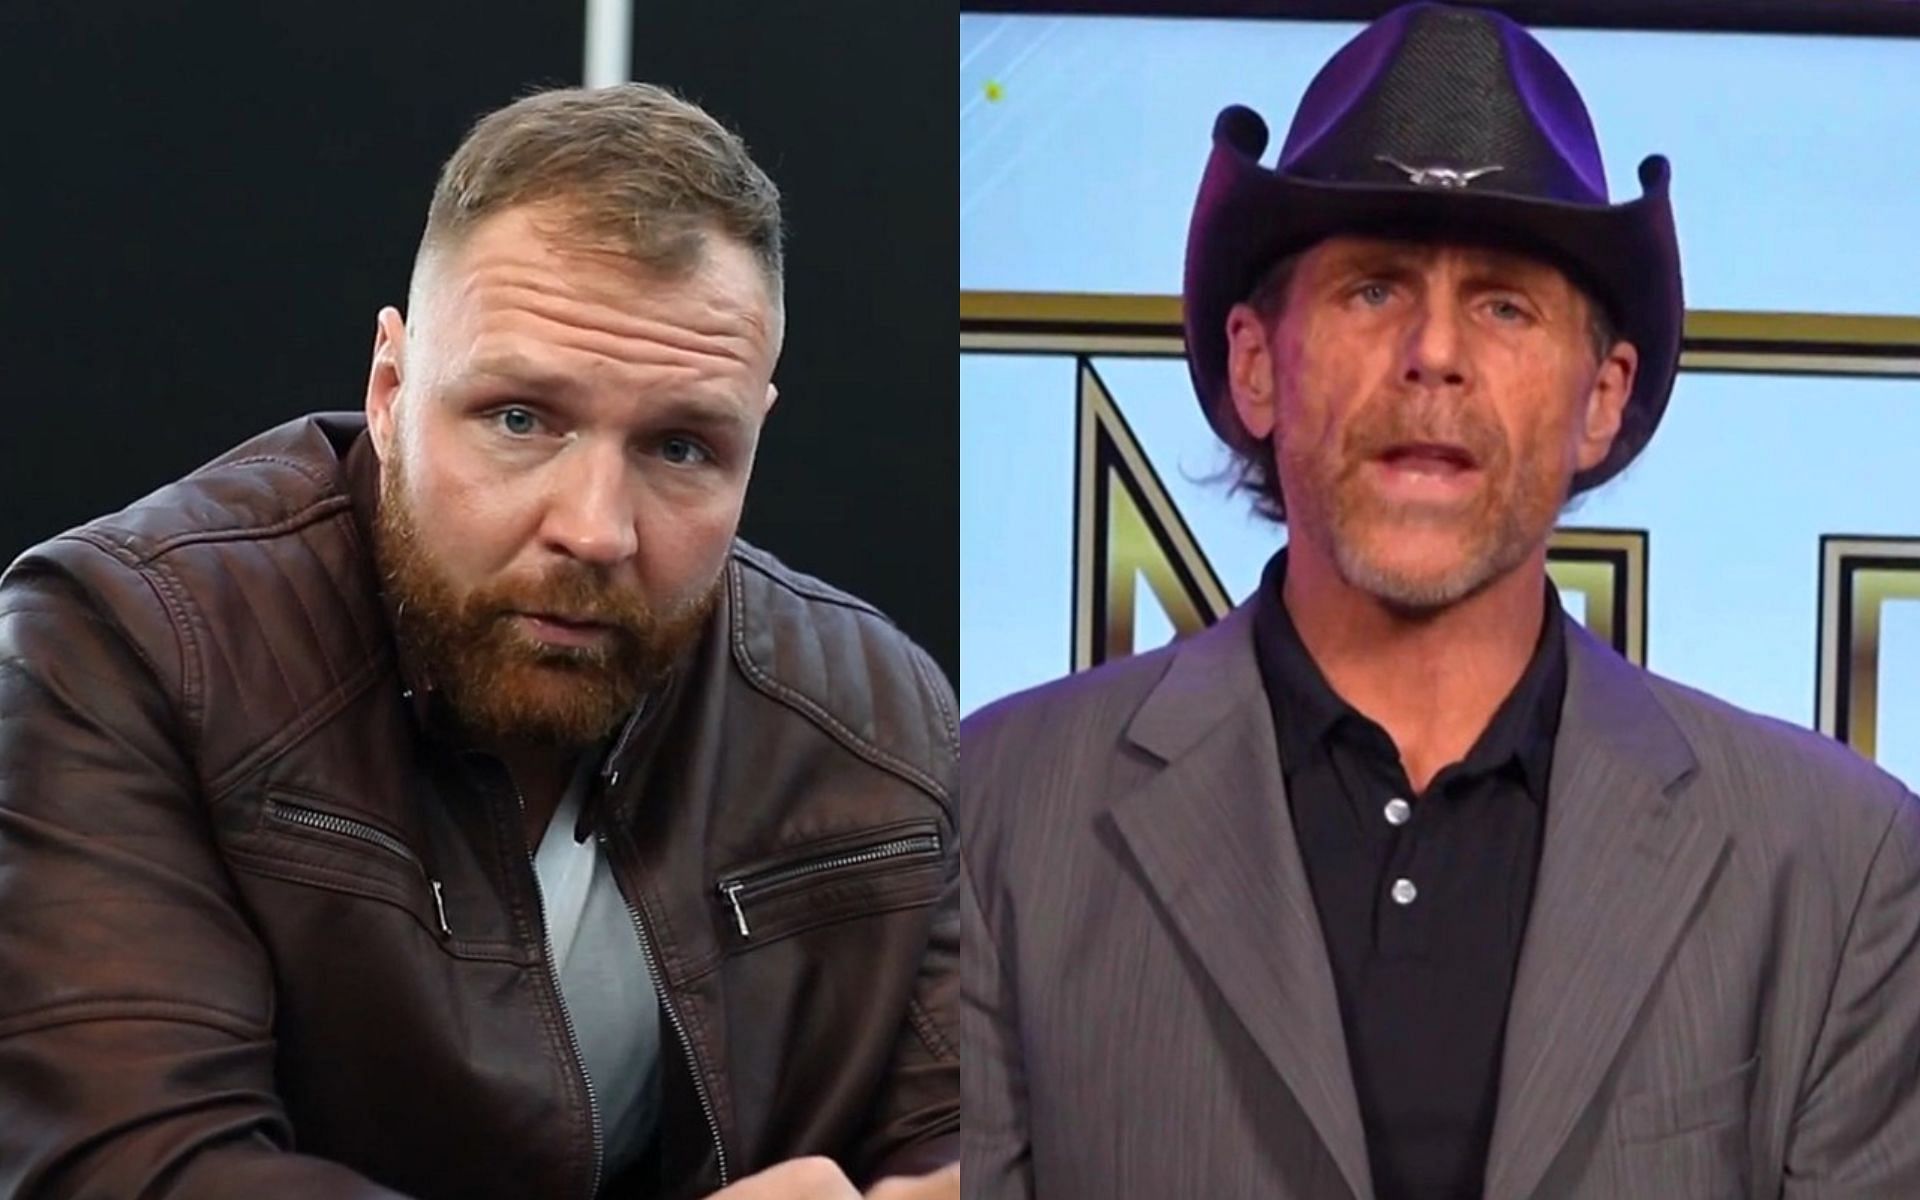 Jon Moxley (L); and Shawn Michaels (R) made shocking confessions from their careers with WWE.